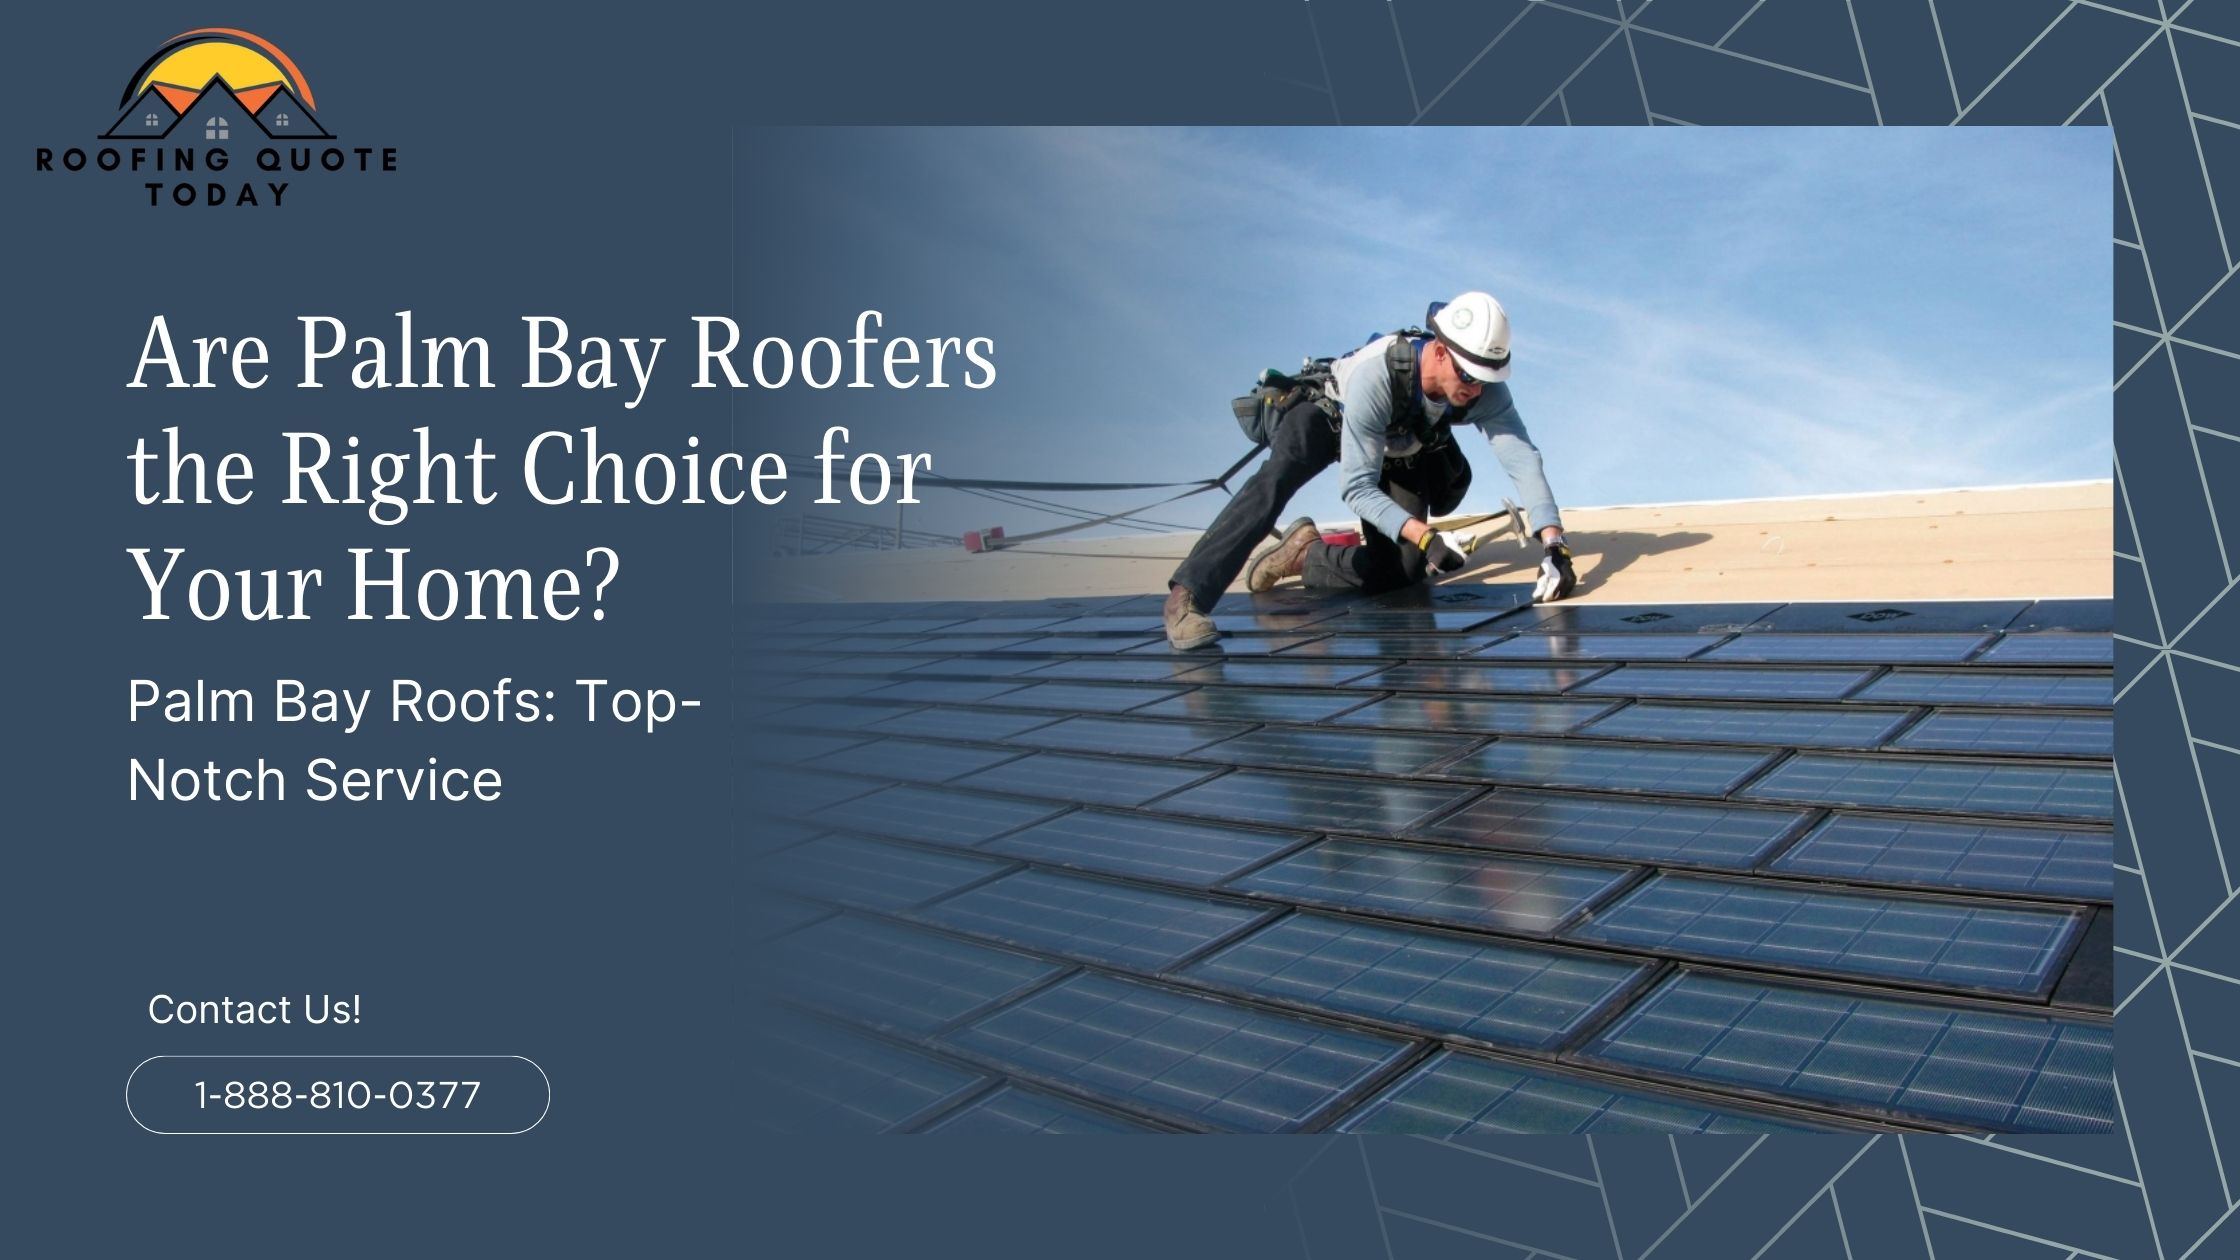 Are Palm Bay Roofers the Right Choice for Your Home?